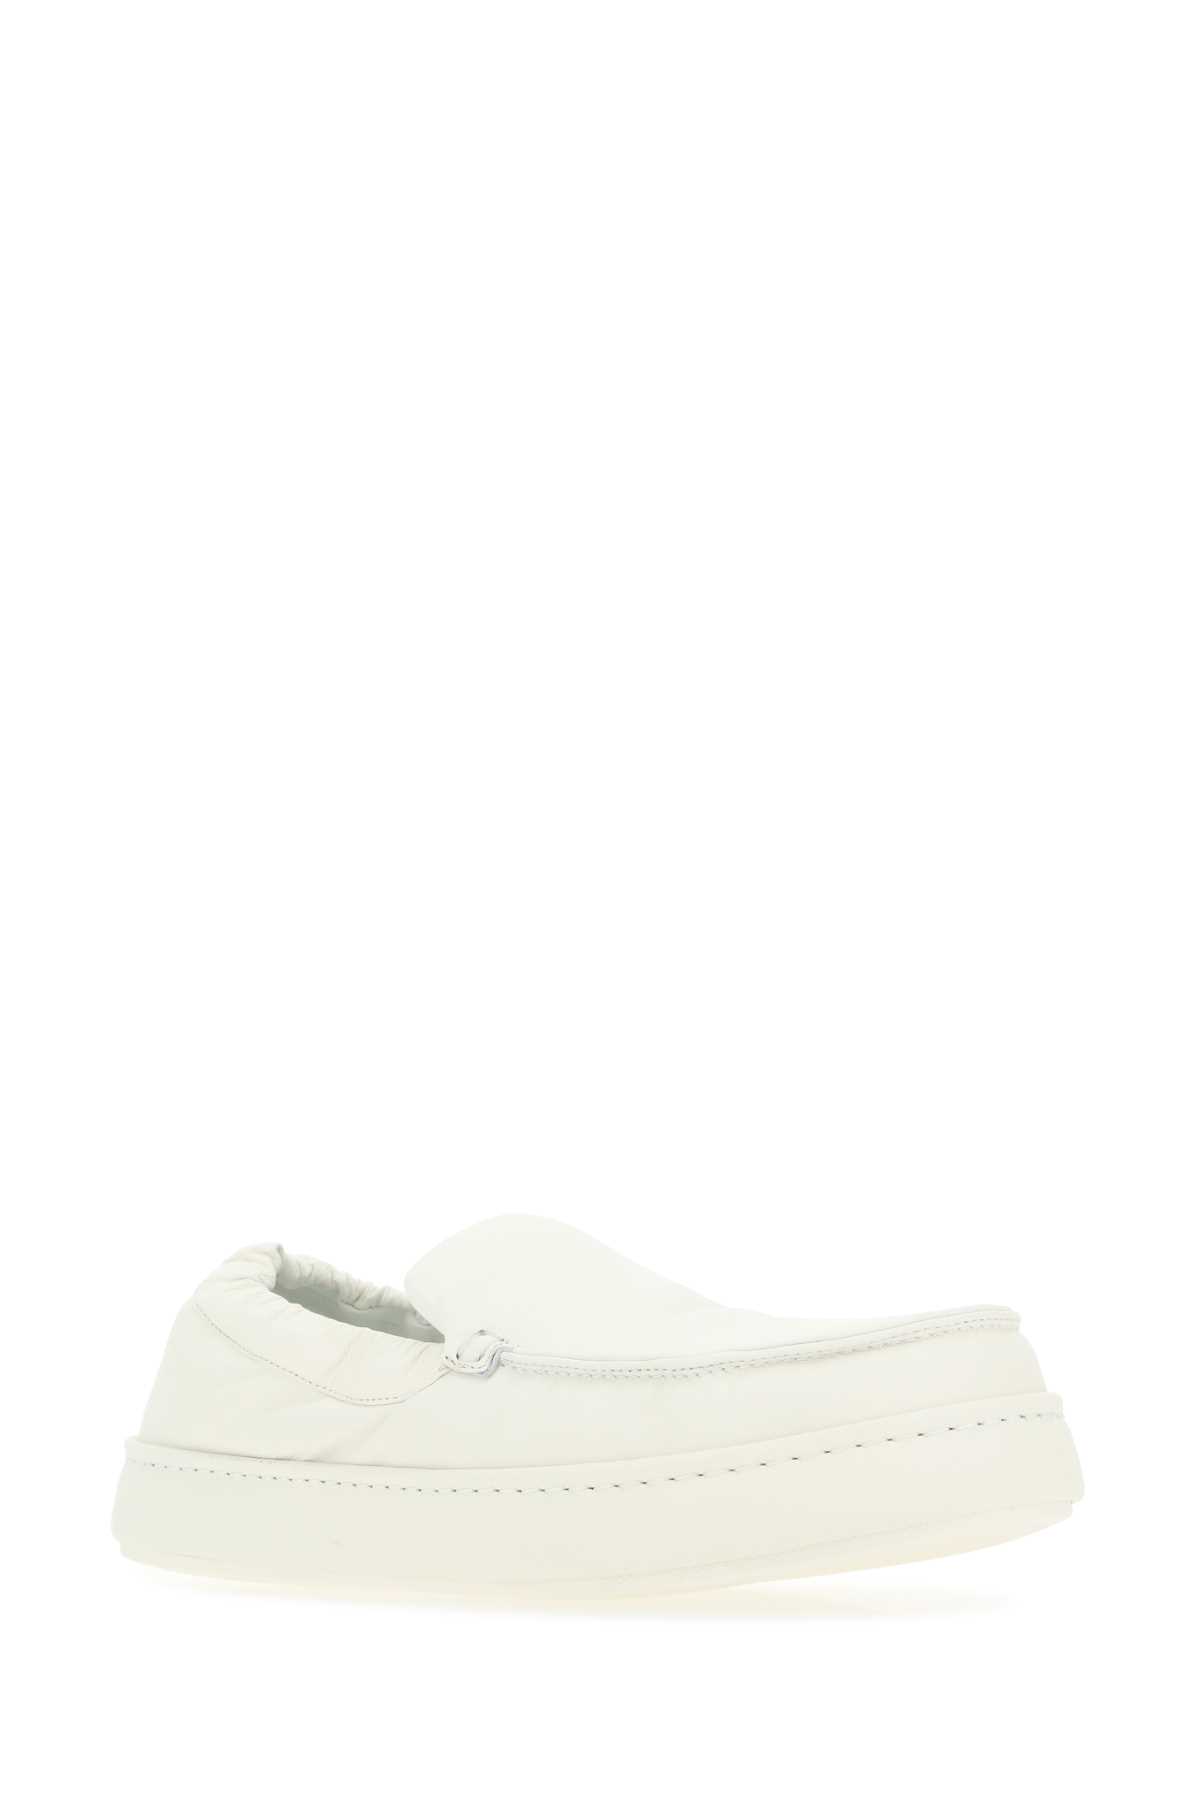 Shop Zegna White Nappa Leather Loafers In Lgi